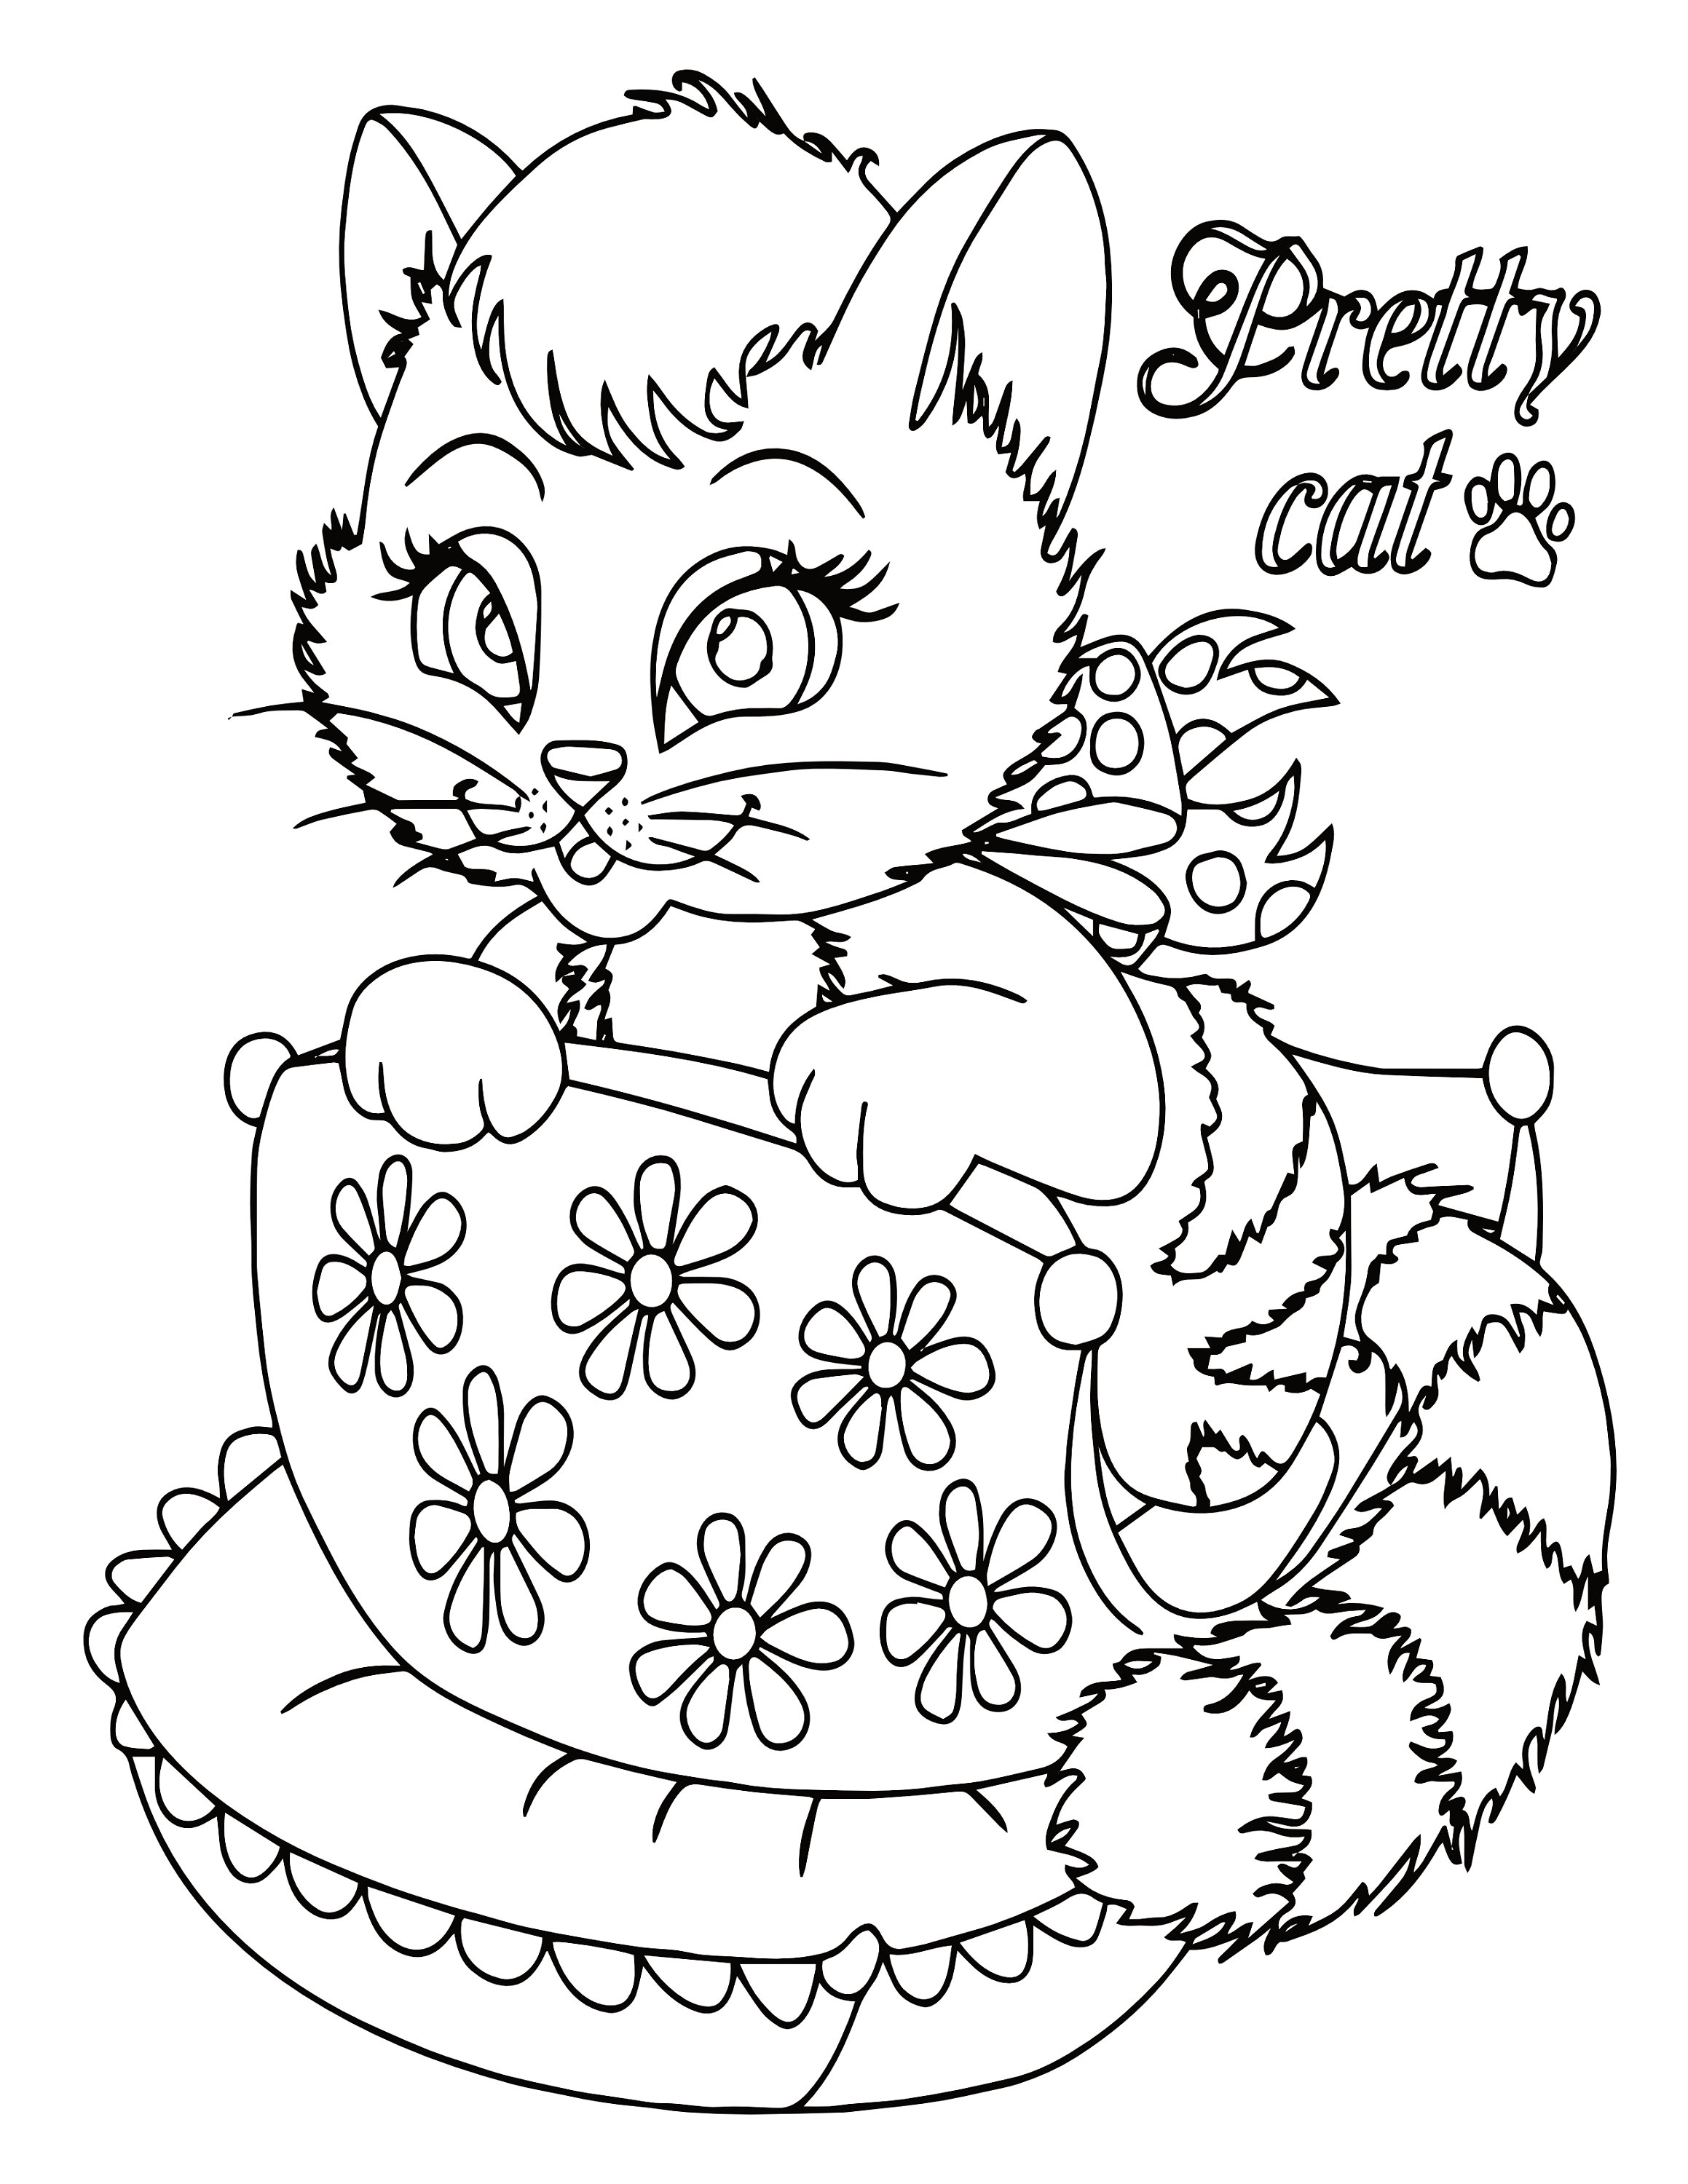 Kitten Coloring Pages 20 Printable Kitten Coloring Pages for   Etsy